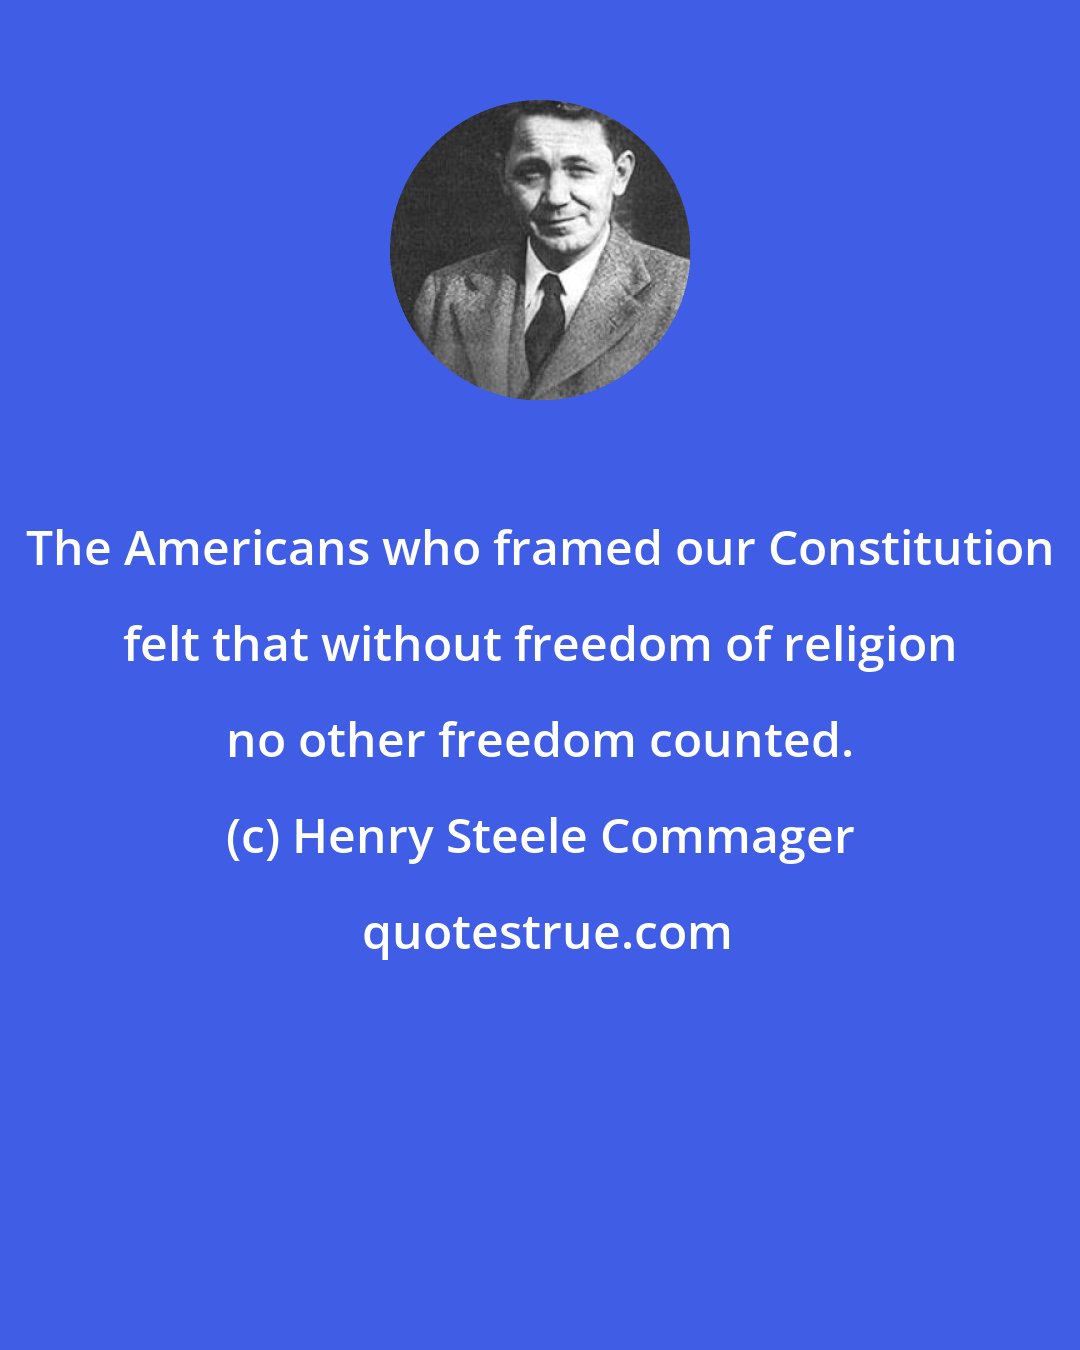 Henry Steele Commager: The Americans who framed our Constitution felt that without freedom of religion no other freedom counted.